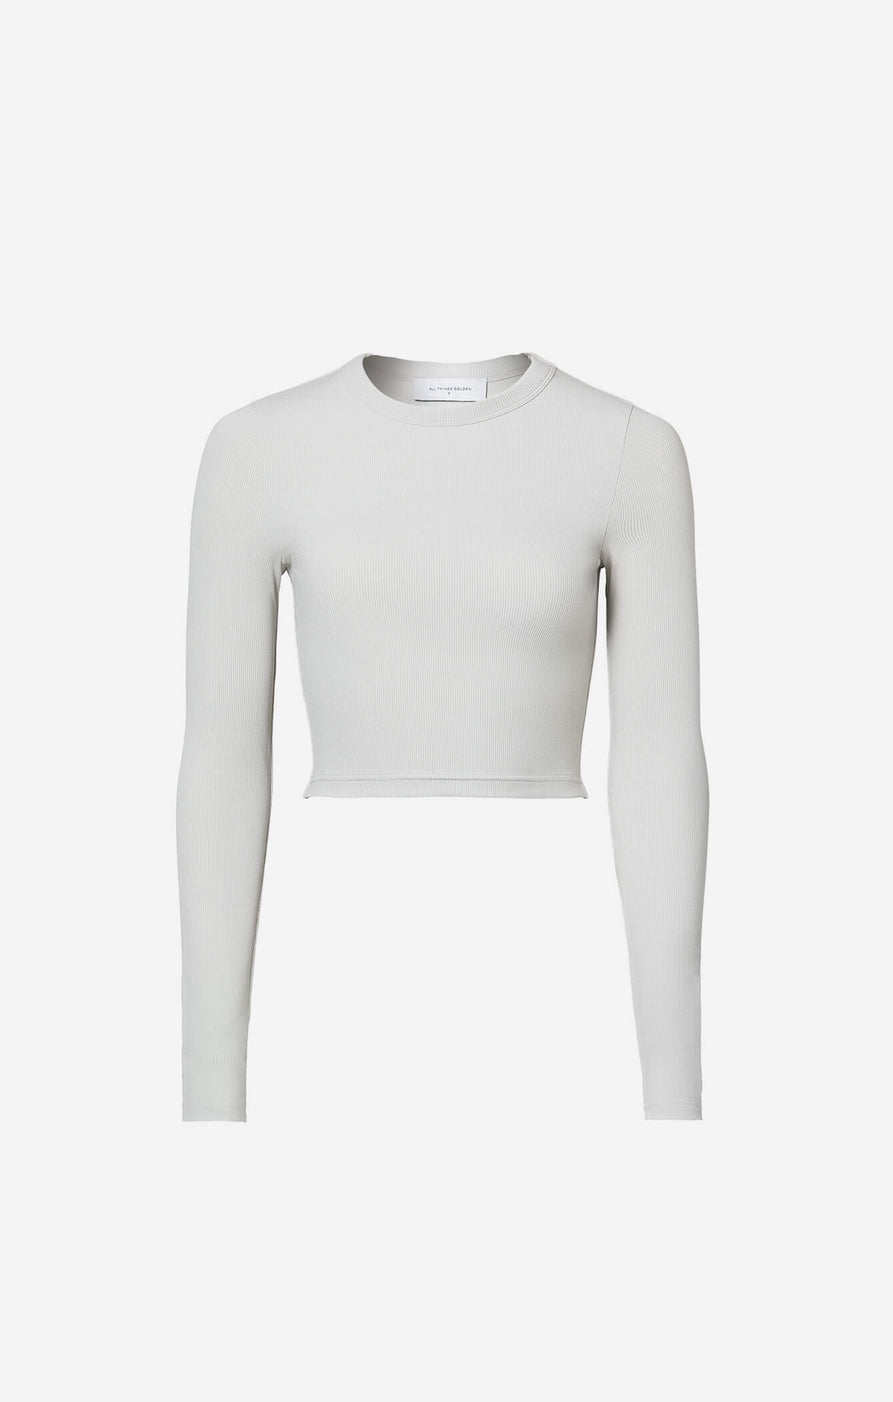 THE LUXE RIB L/S CROP - STONE